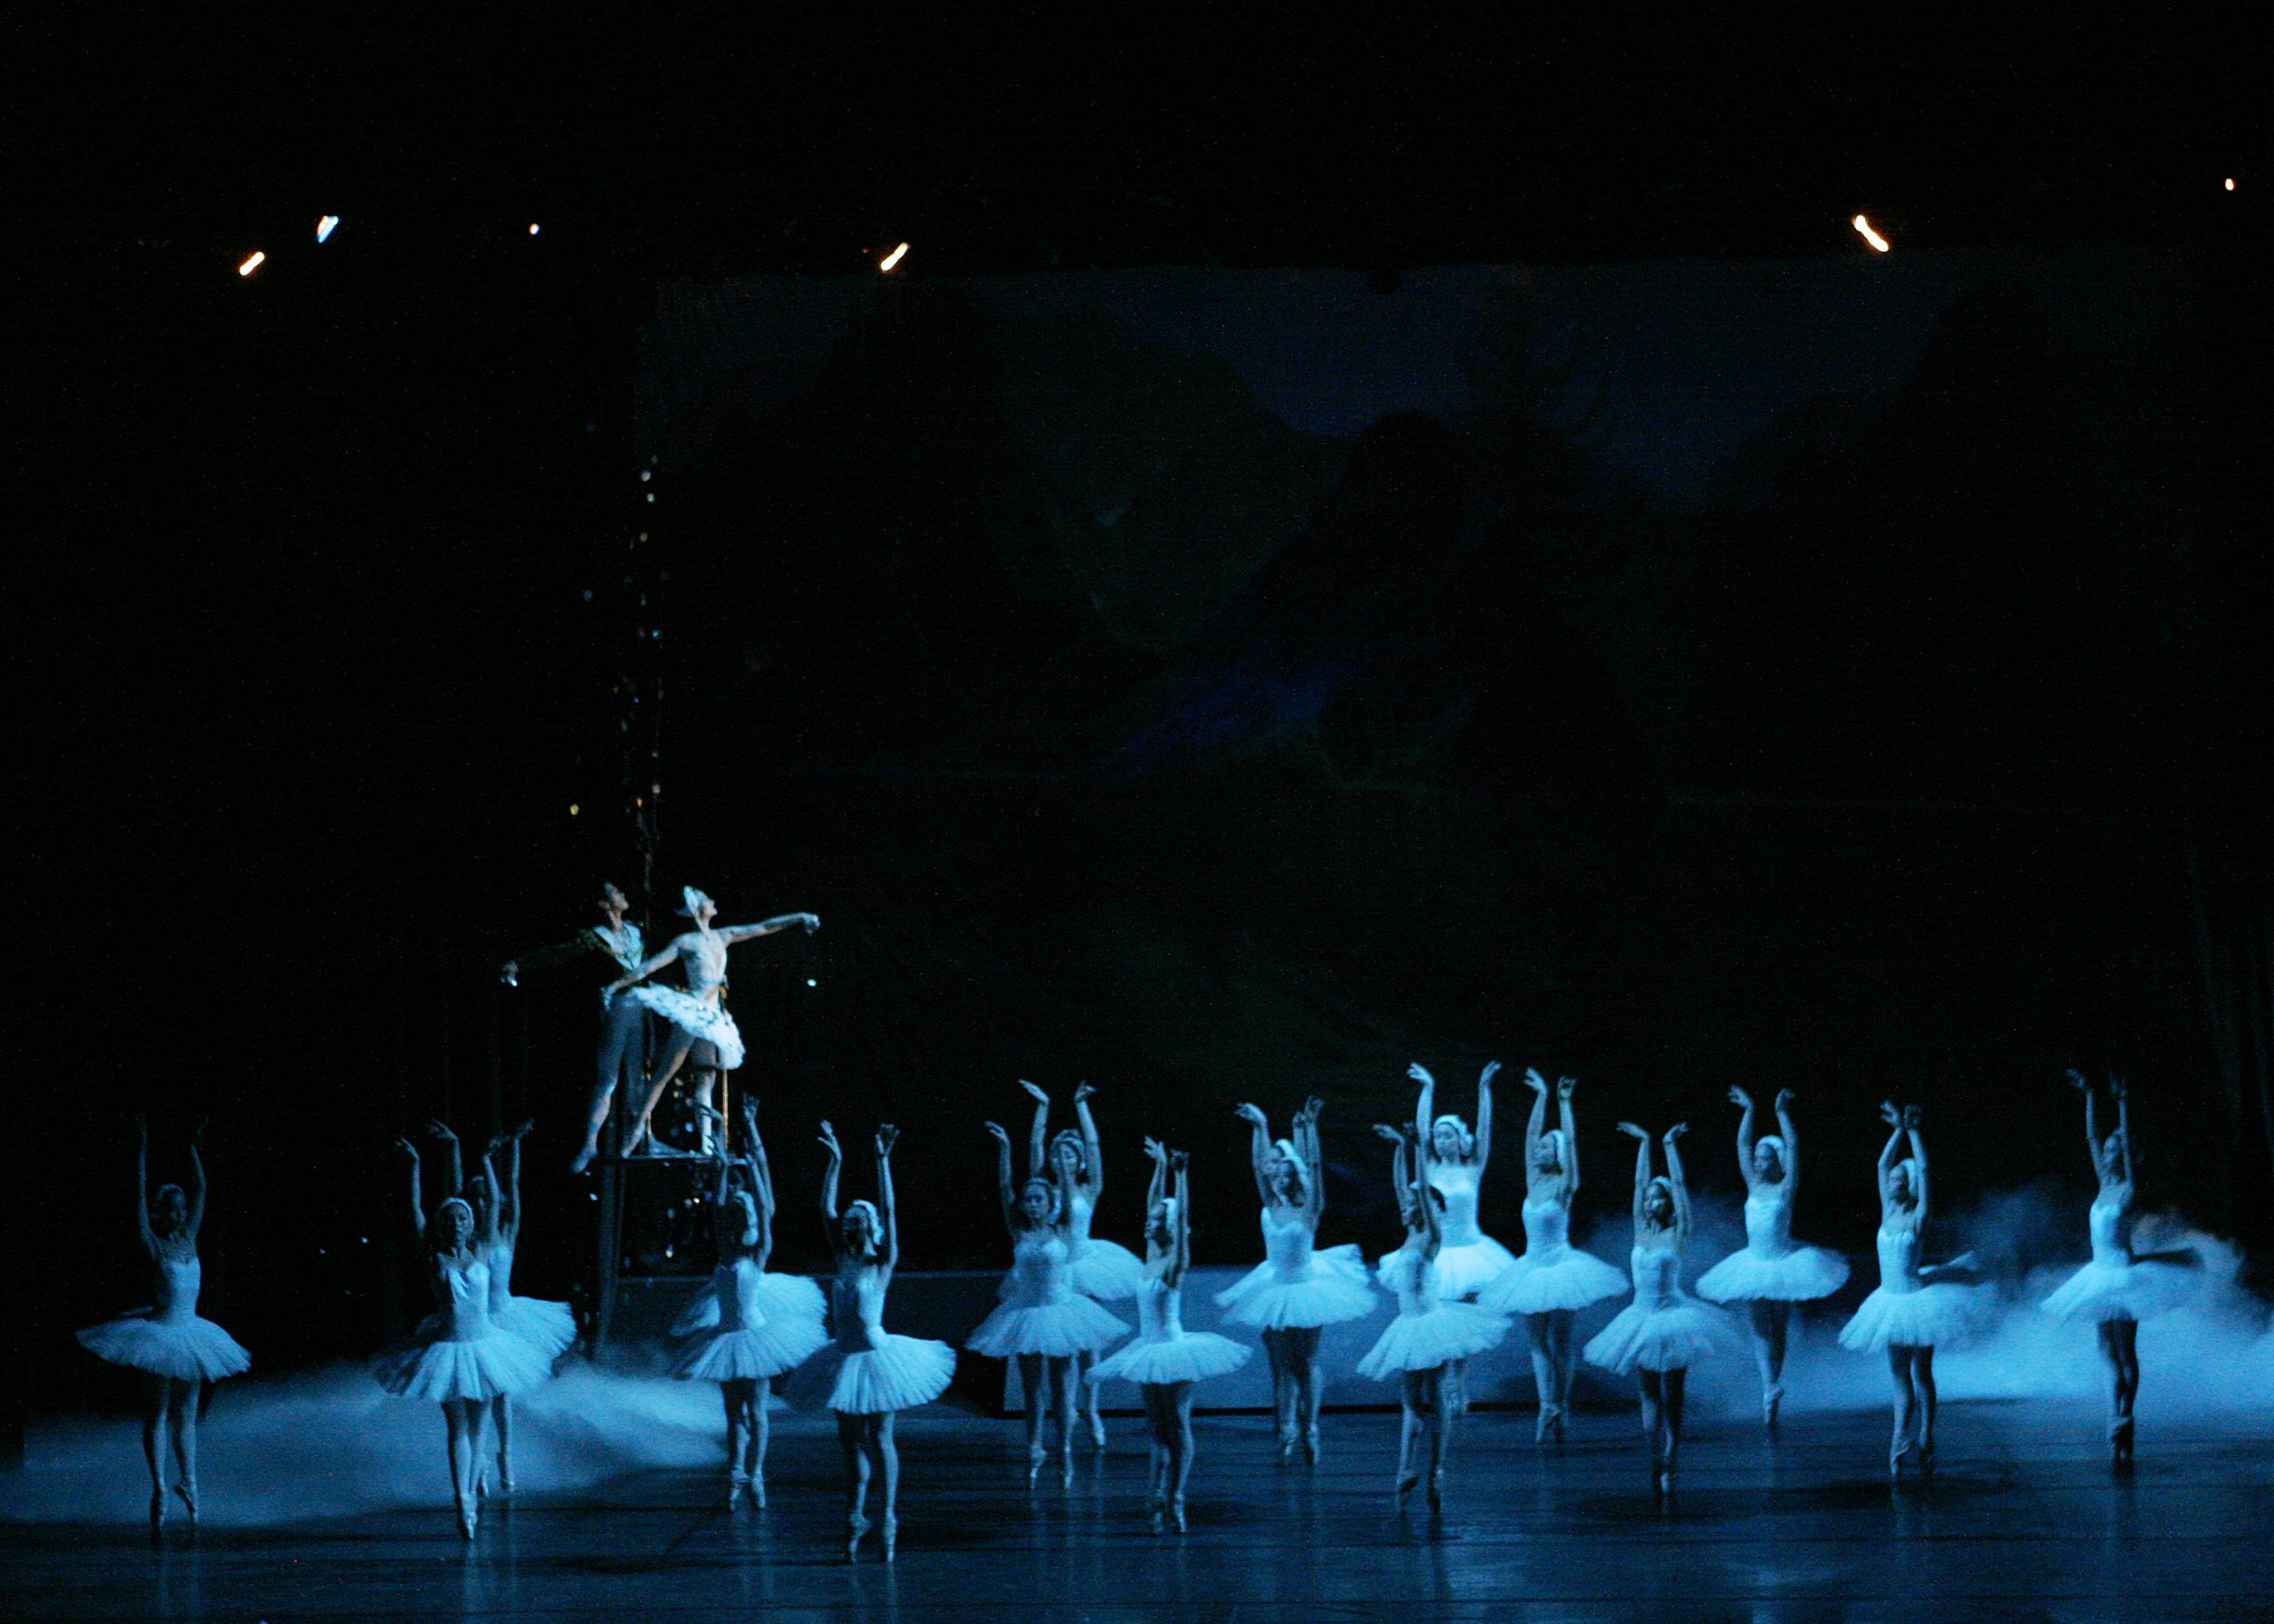    “Flying off” to the afterlife with Rudy De Dios as Siegfried in Ballet Manila’s  Swan Lake , 2007. “Few people realize that there are two versions of Swan Lake: one which ends with the tragic suicide of the lovelorn couple hoping to find redemptio